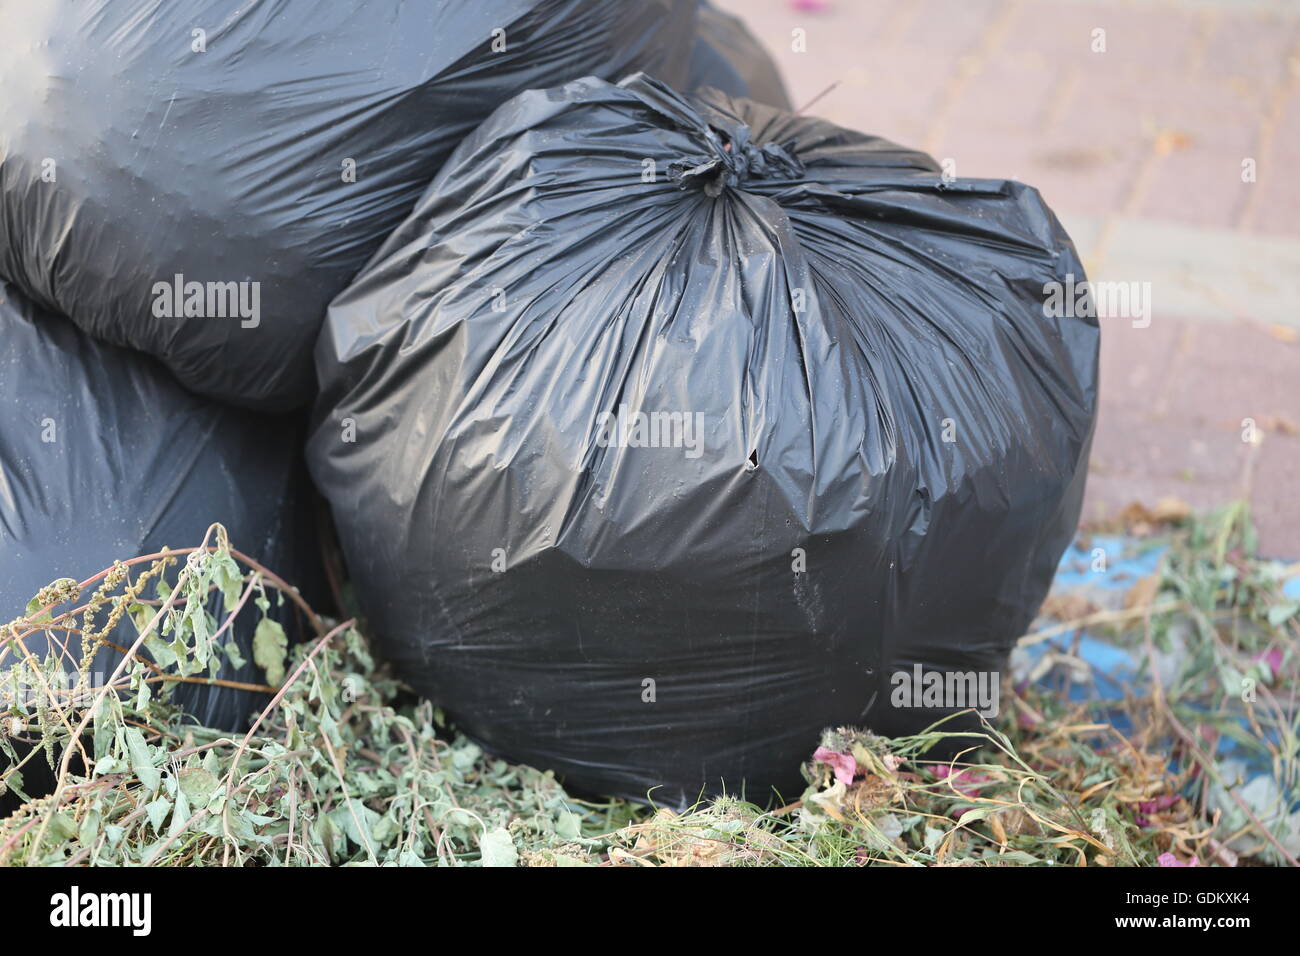 Pile of Full Garbage Bags. Pile of green garbage bags tied up tightly, placed on the ground in the street. Stock Photo